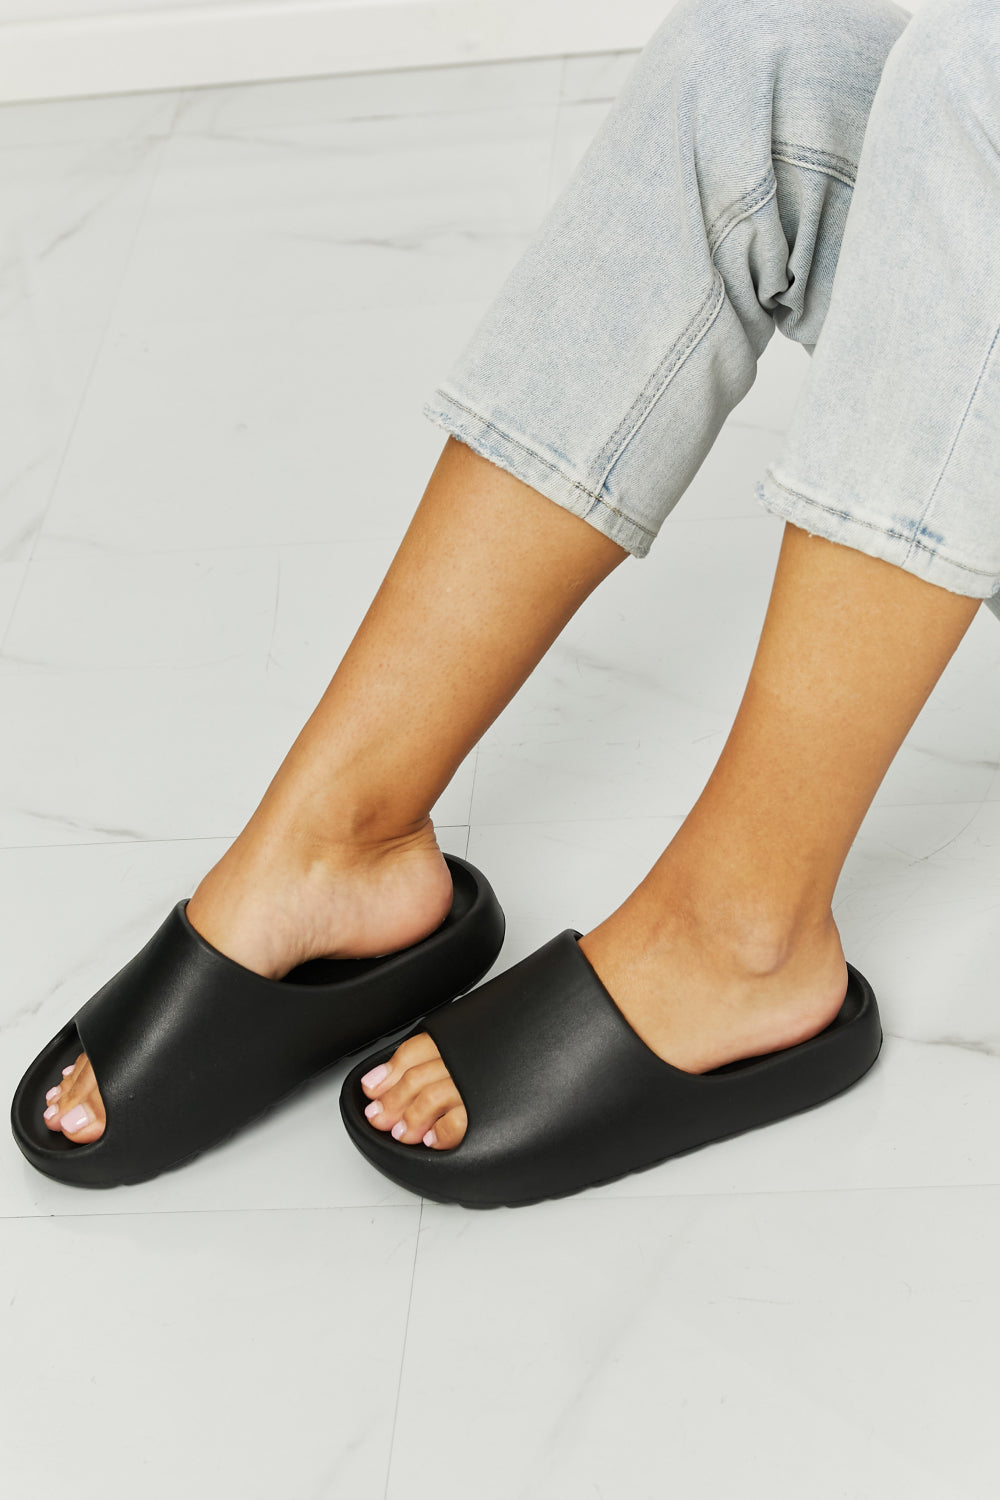 NOOK JOI In My Comfort Zone Slides in Black - Online Only